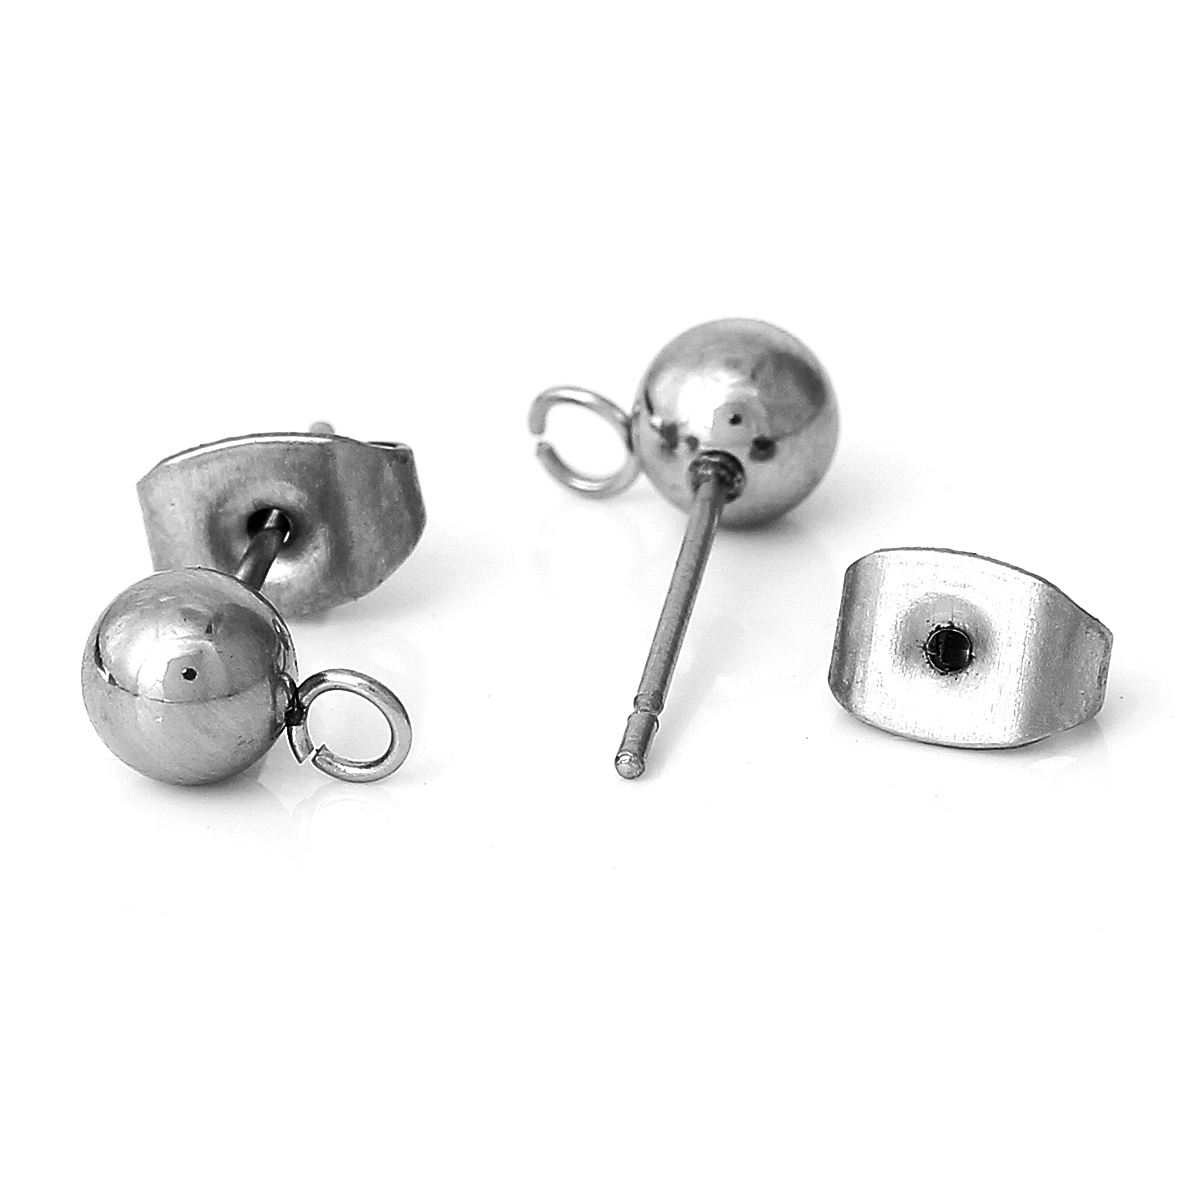 Picture of 304 Stainless Steel Ear Post Stud Earrings Findings Ball Silver Tone W/ Loop 17mm( 5/8") x 8mm( 3/8"), Post/ Wire Size: (21 gauge), 20 PCs